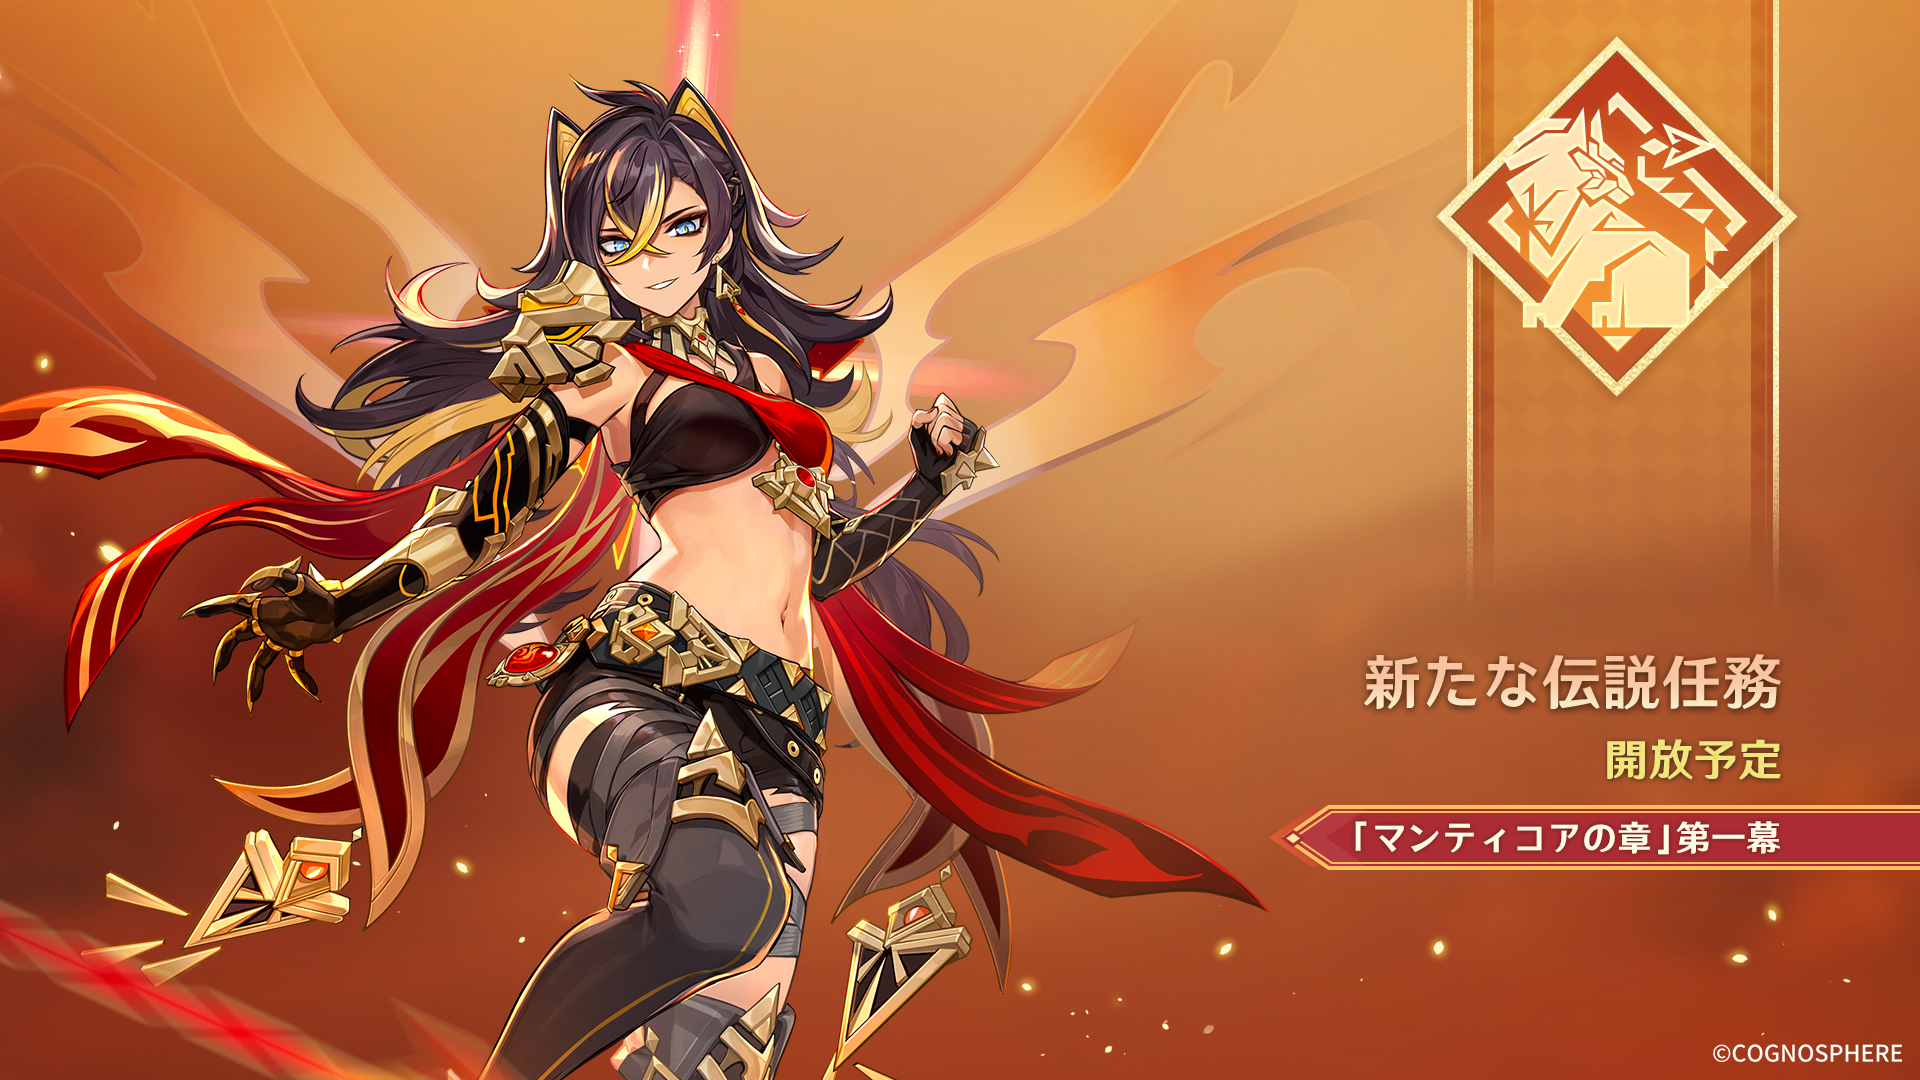 Dehya will be on the regular banner after version 3.5